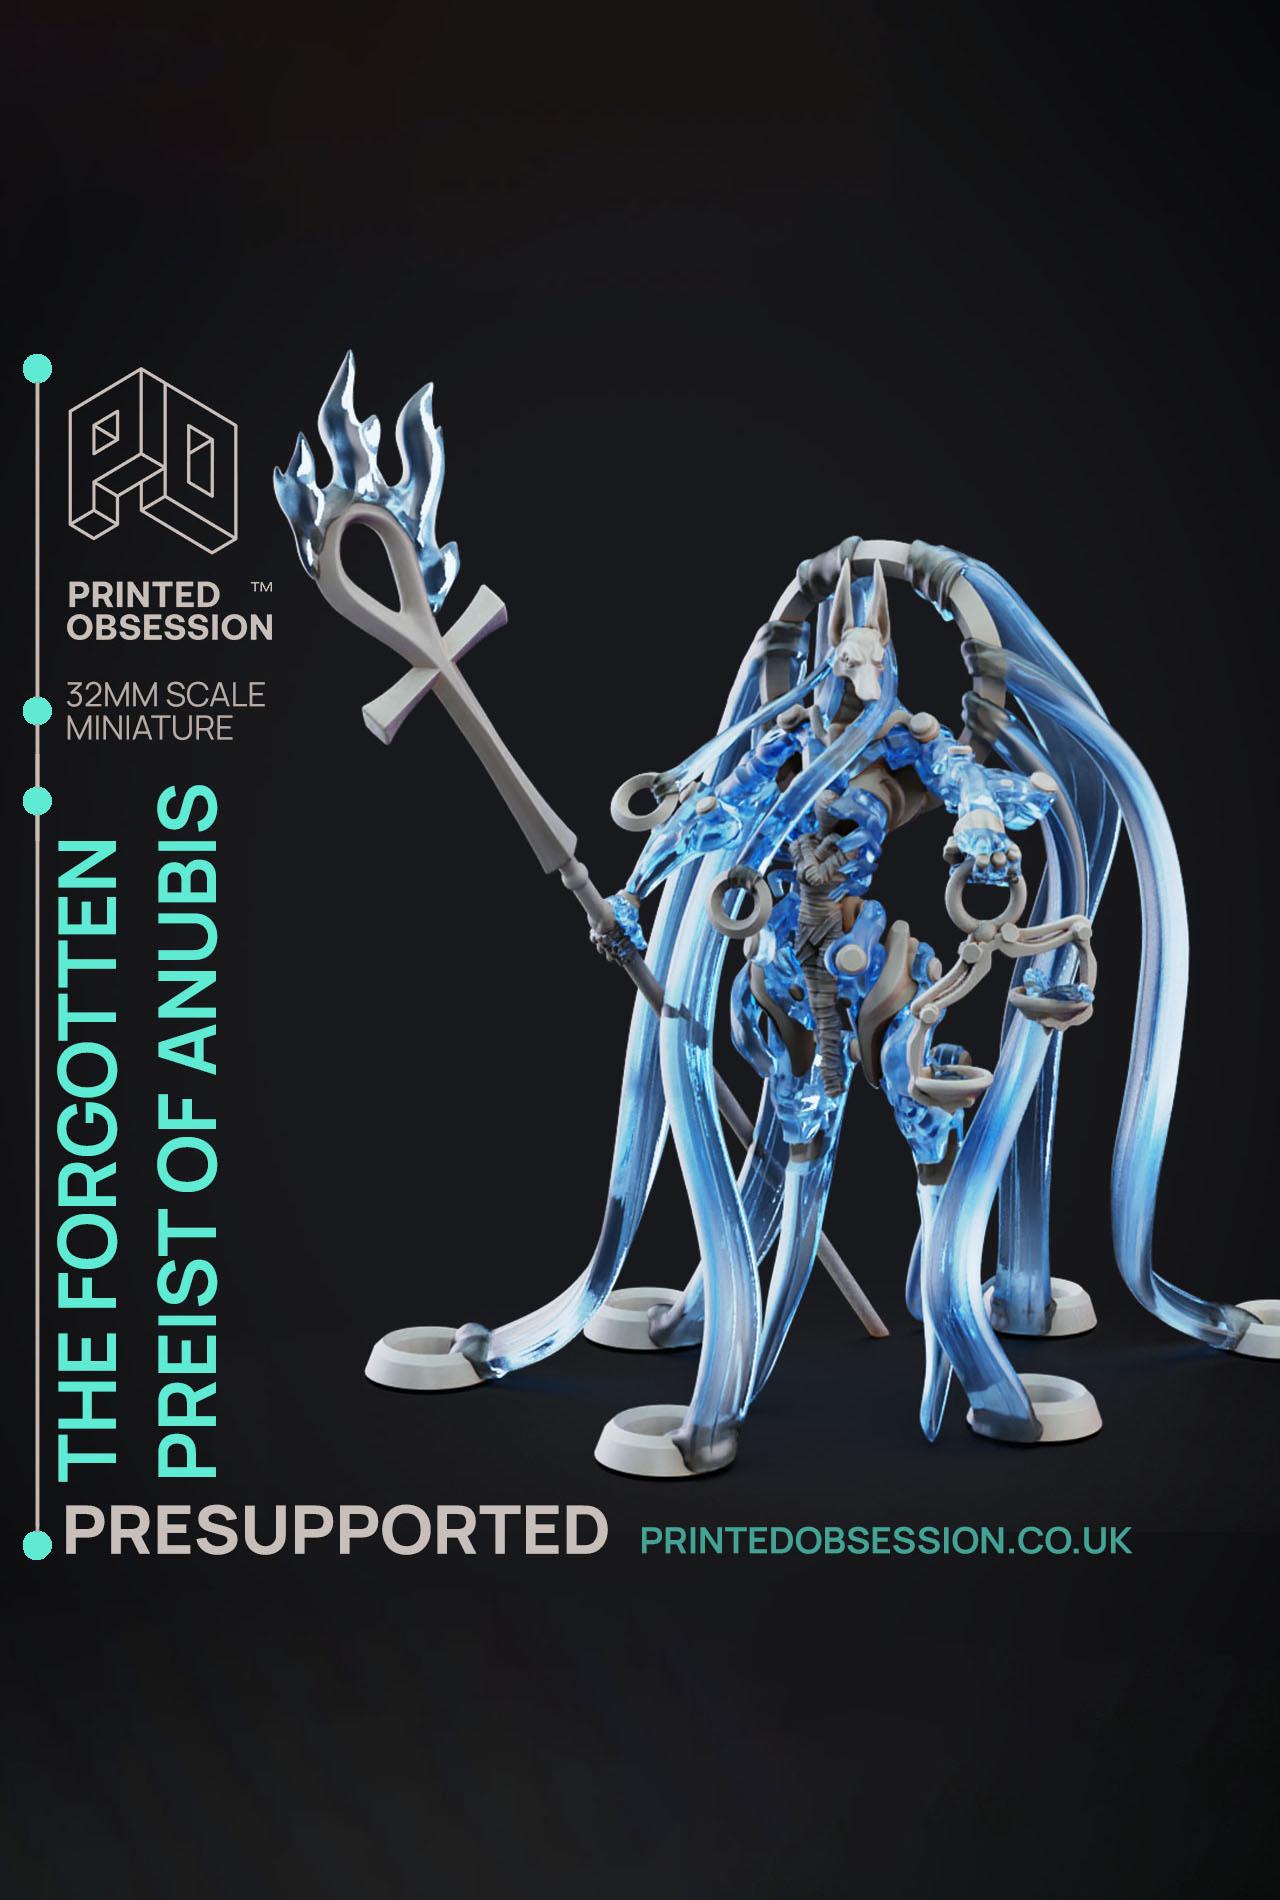 The Forgotten Preist of Anubis - Deity Fight Club - PRESUPPORTED - Illustrated and Stats - 32mm scal 3d model